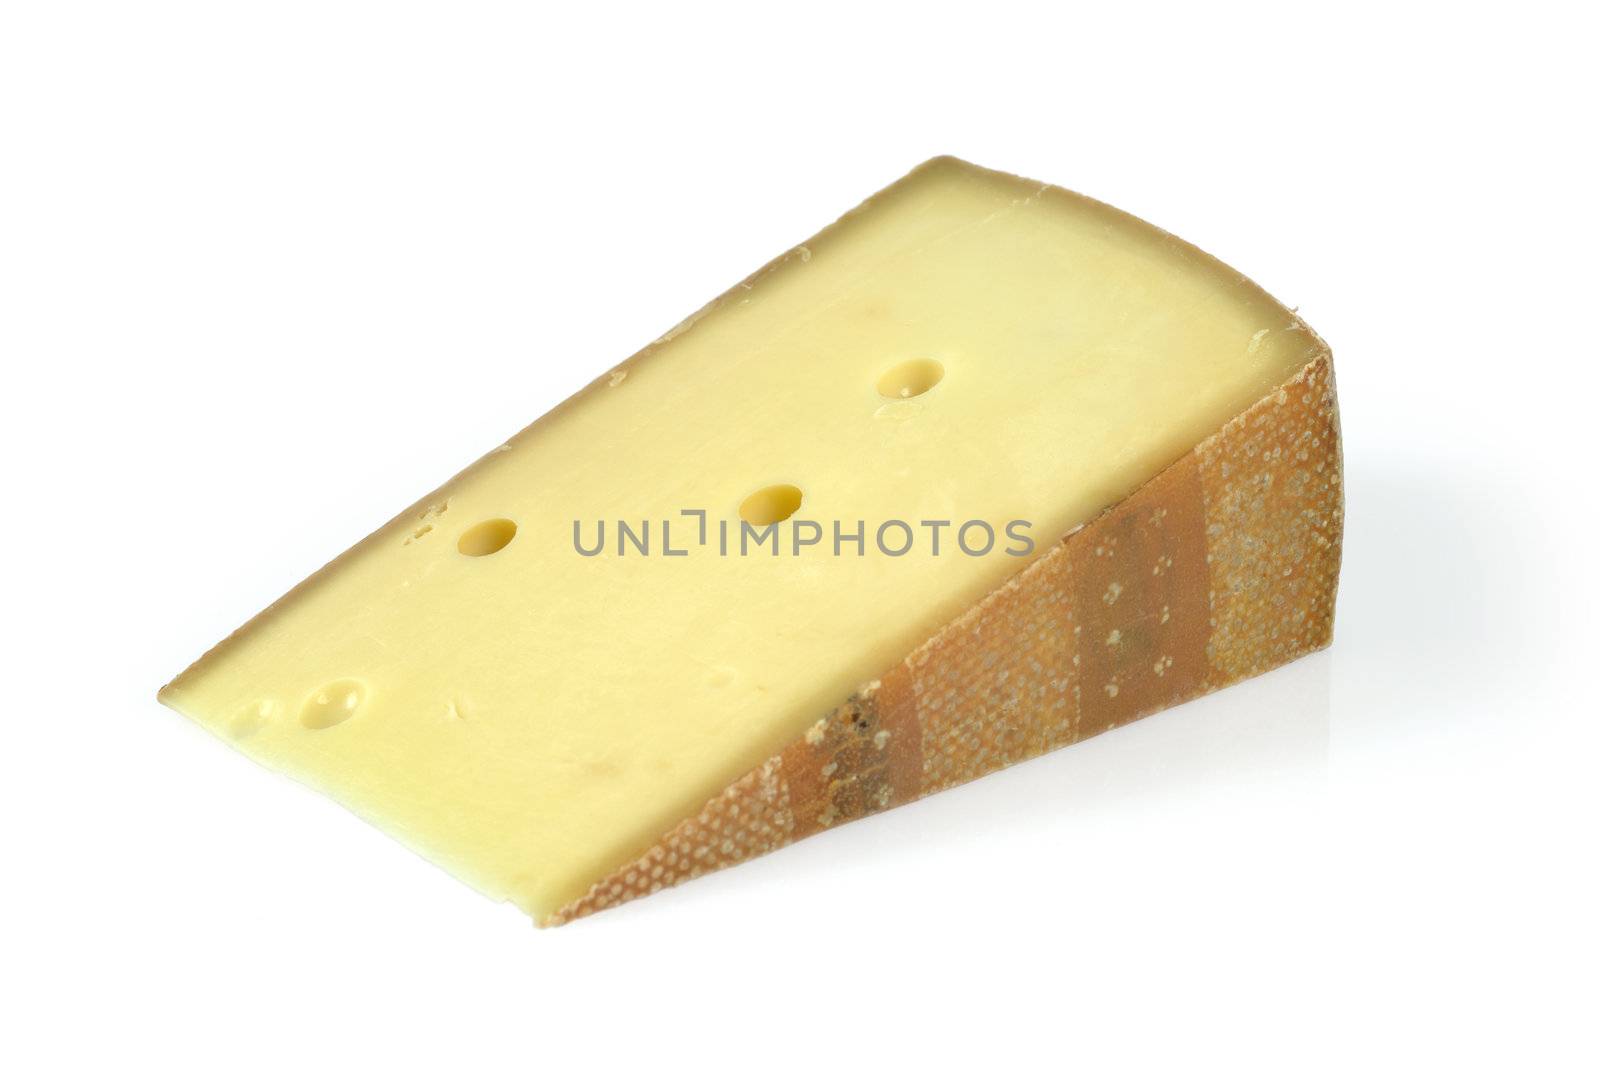 A big wedge of Swiss cheese. Isolated image with clipping path included.
